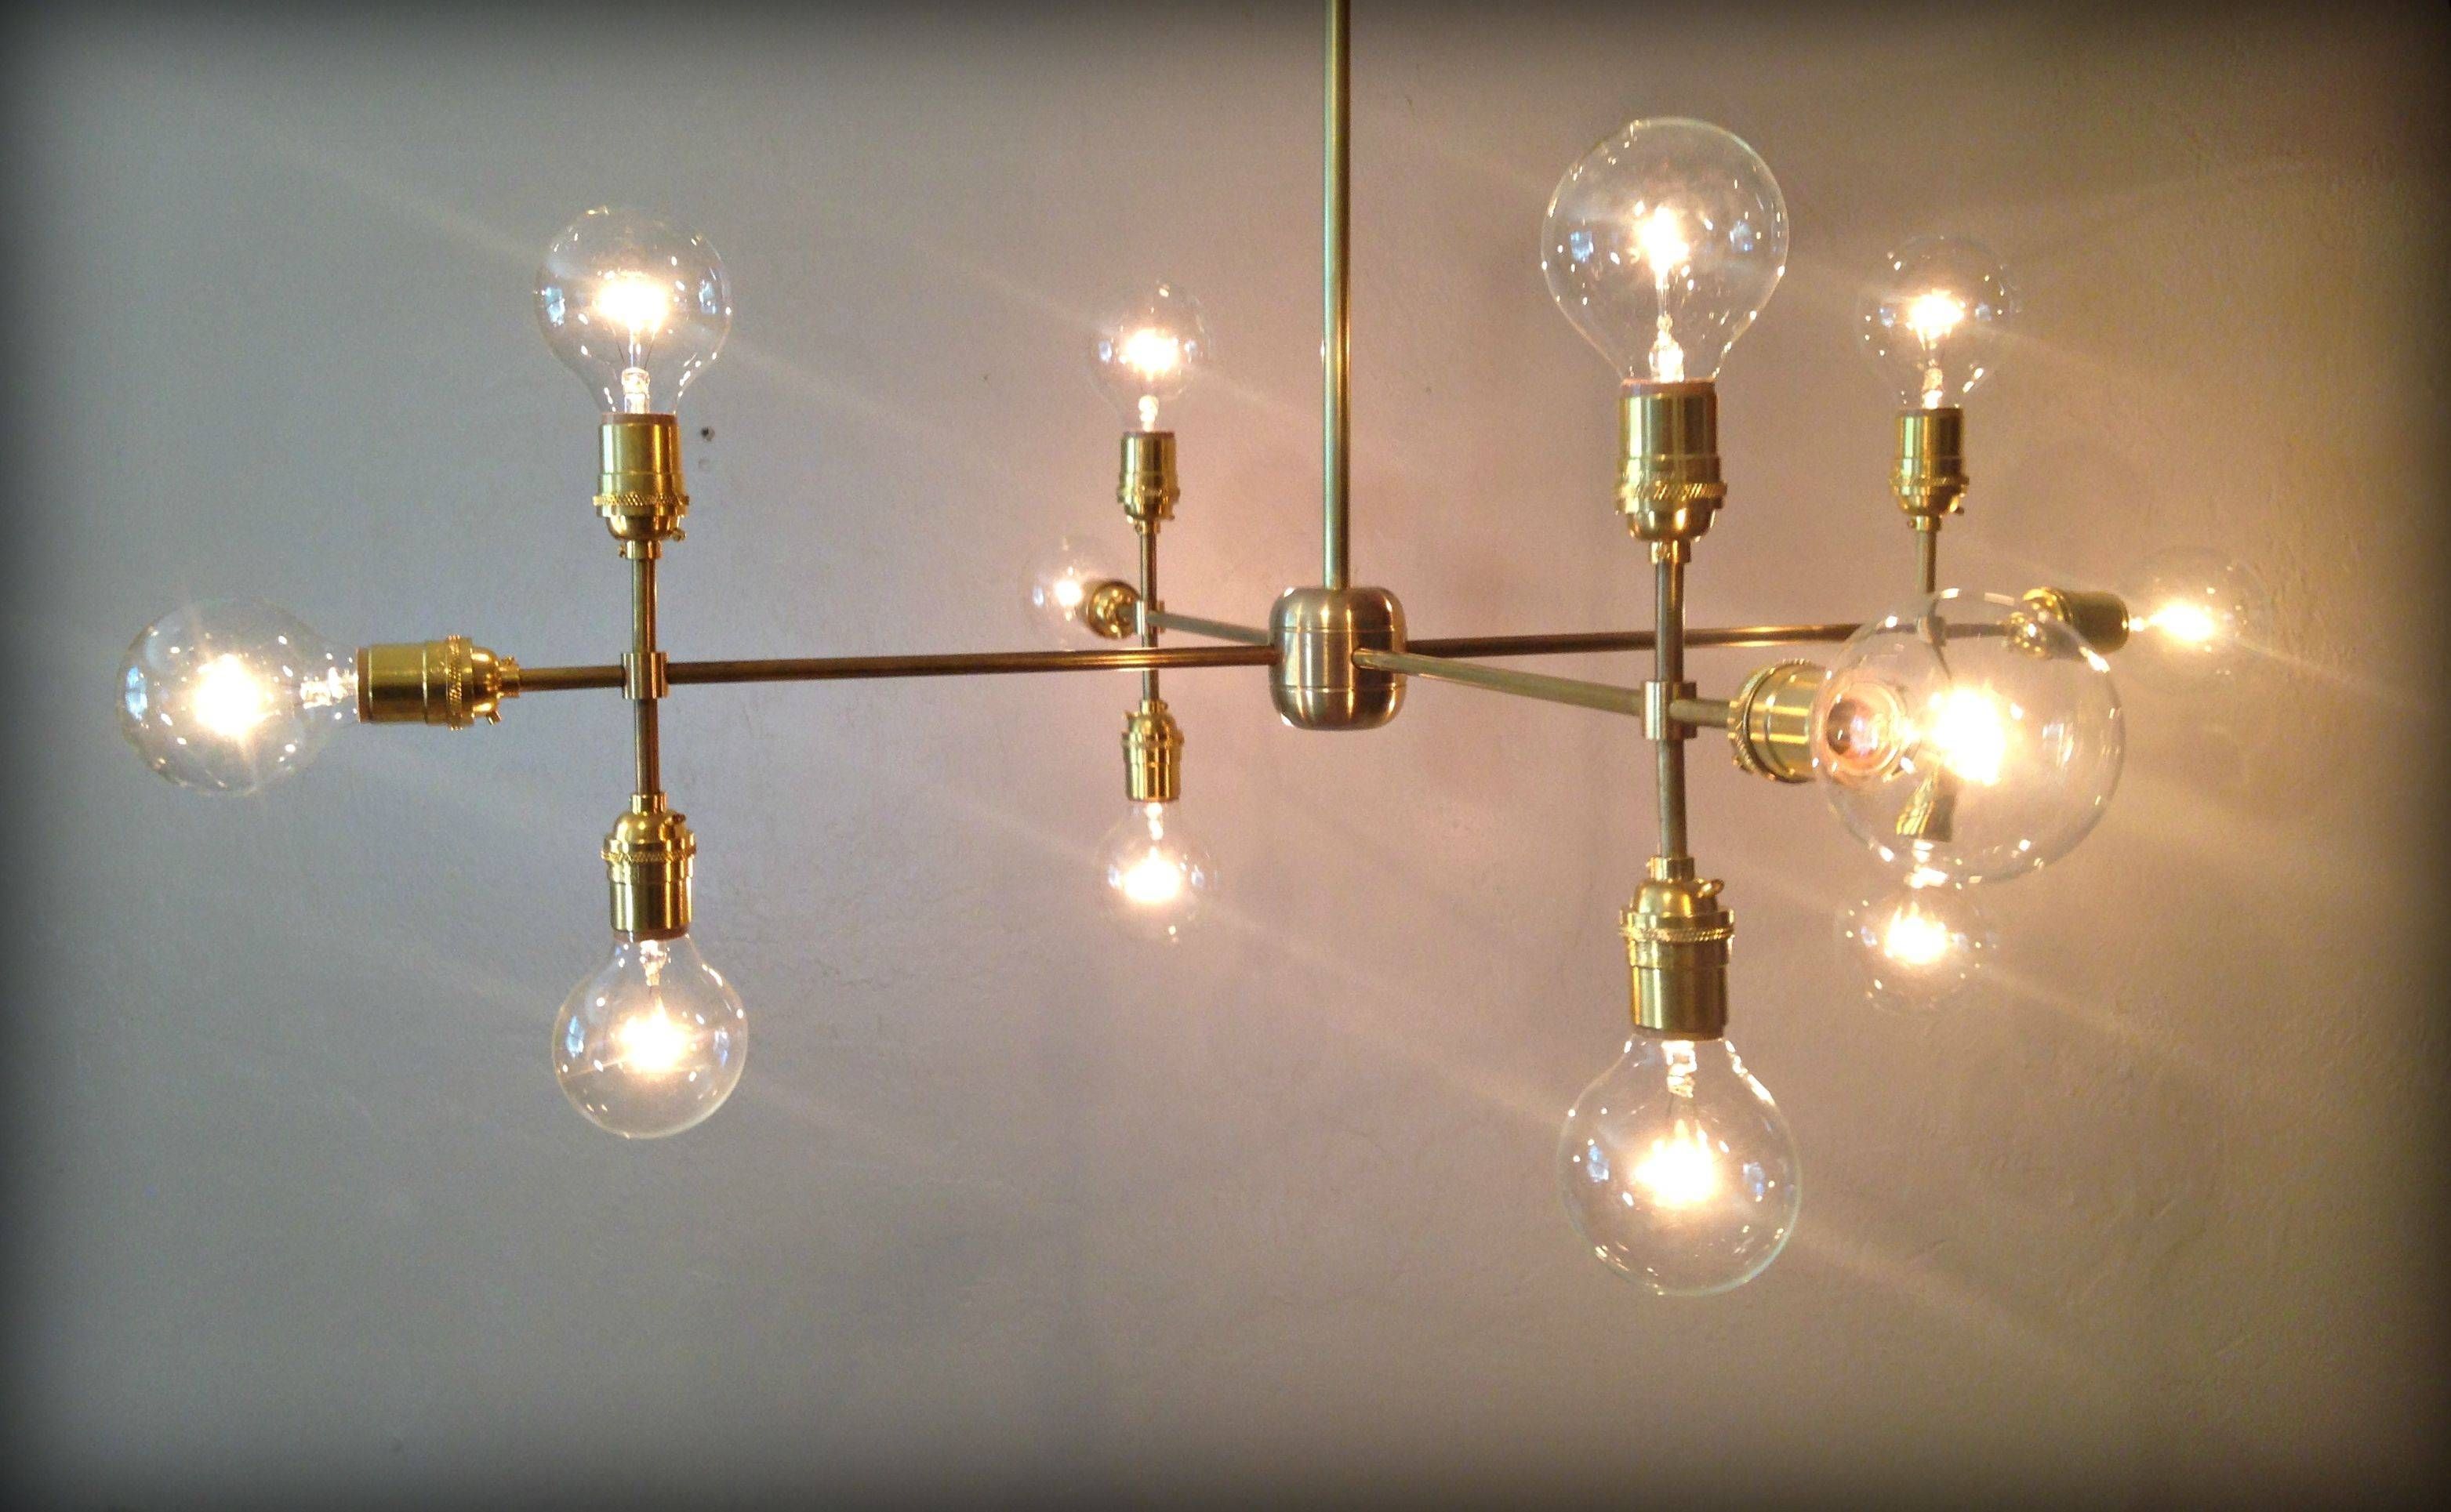 Custom Chandeliers And Pendants | Custommade For Bare Bulb Pendant Light Fixtures (View 12 of 15)